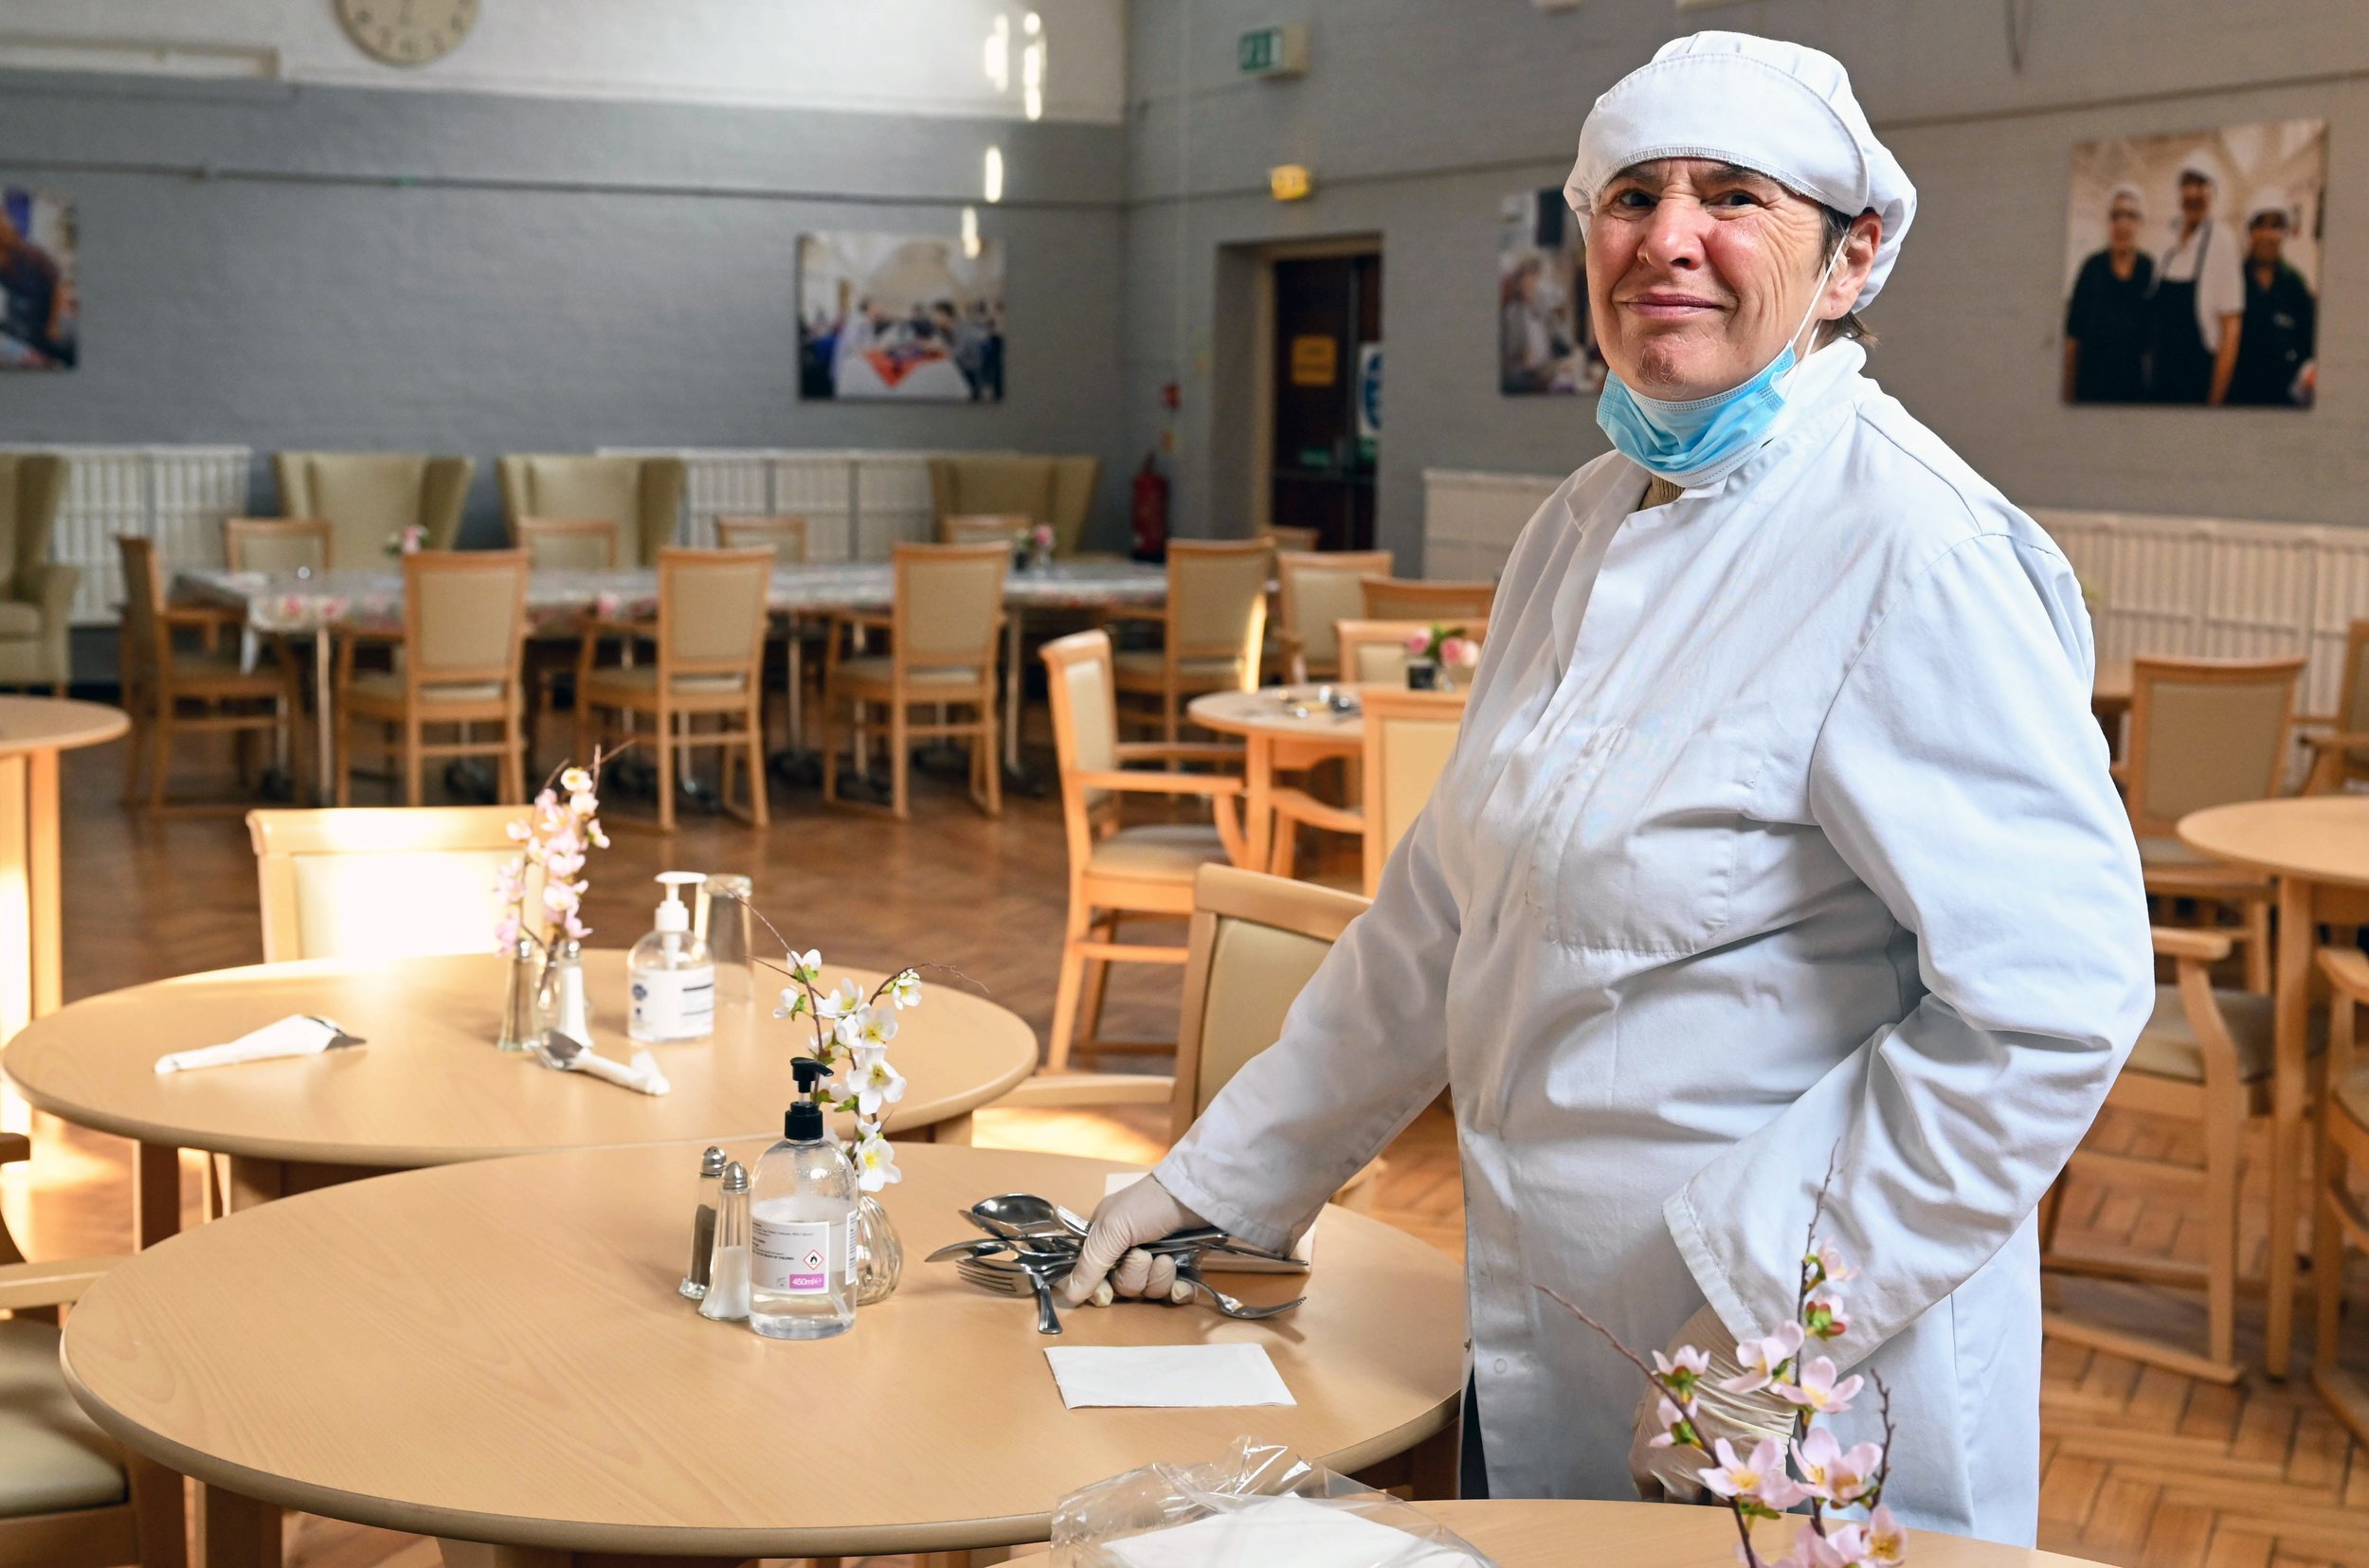 Canteen Lady with hat 2.jpg